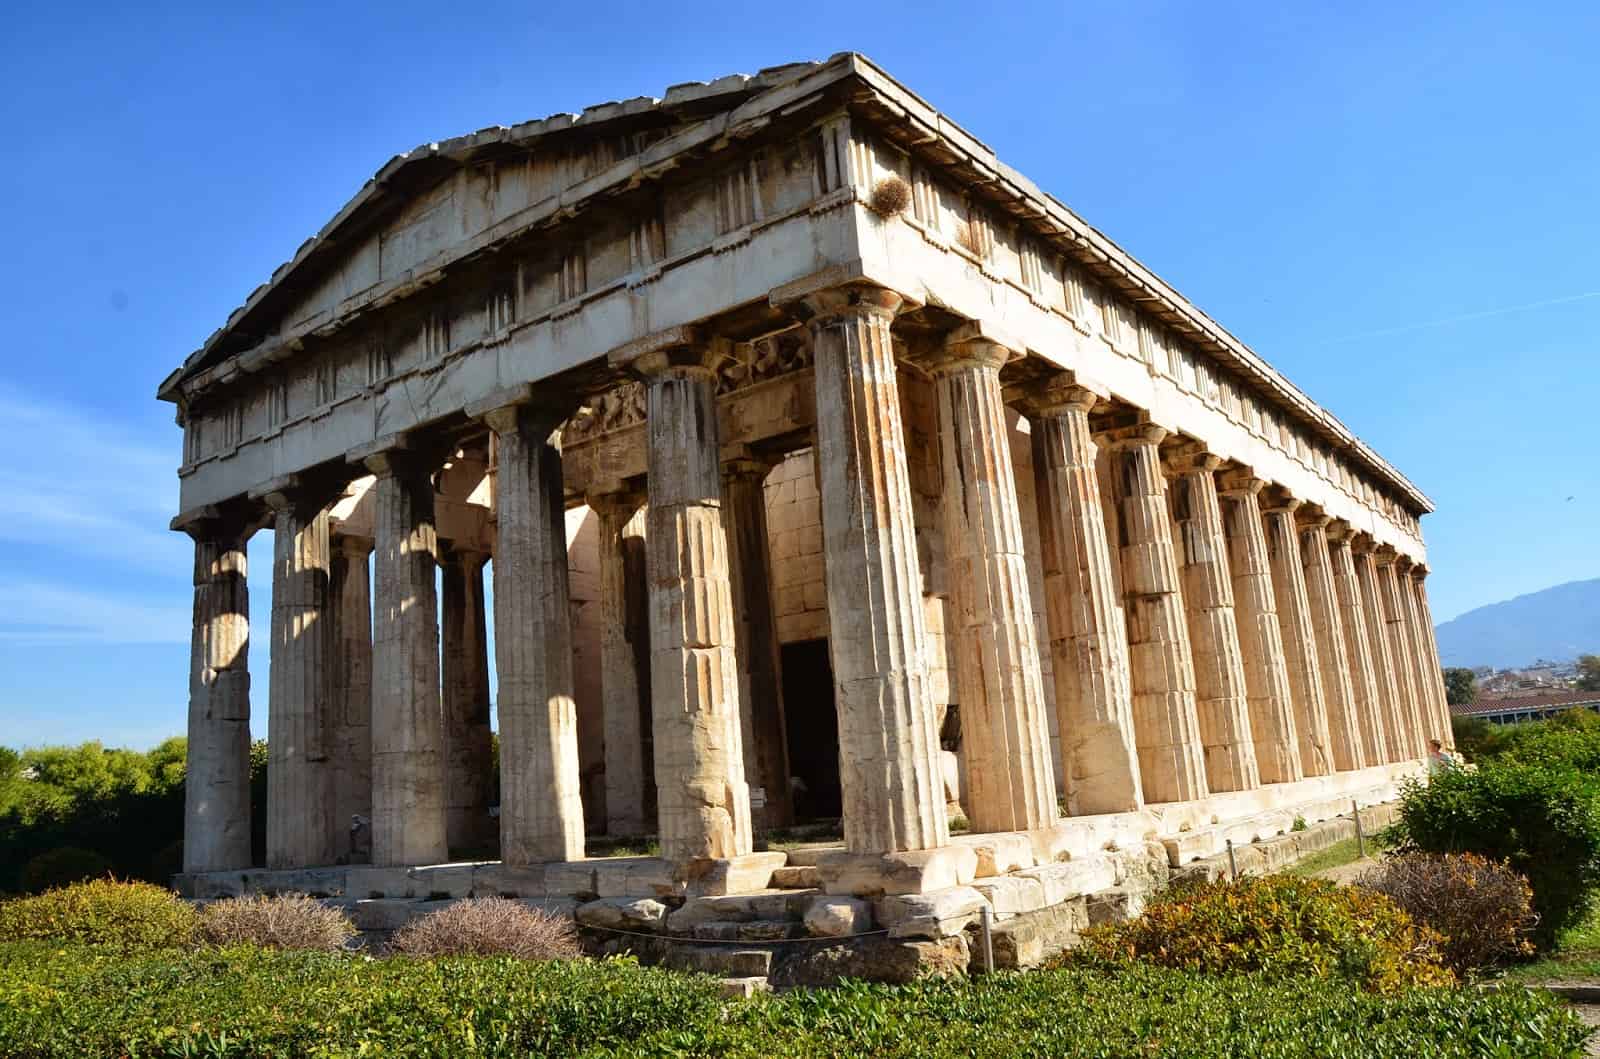 Temple of Hephaestus at the Agora in Athens, Greece